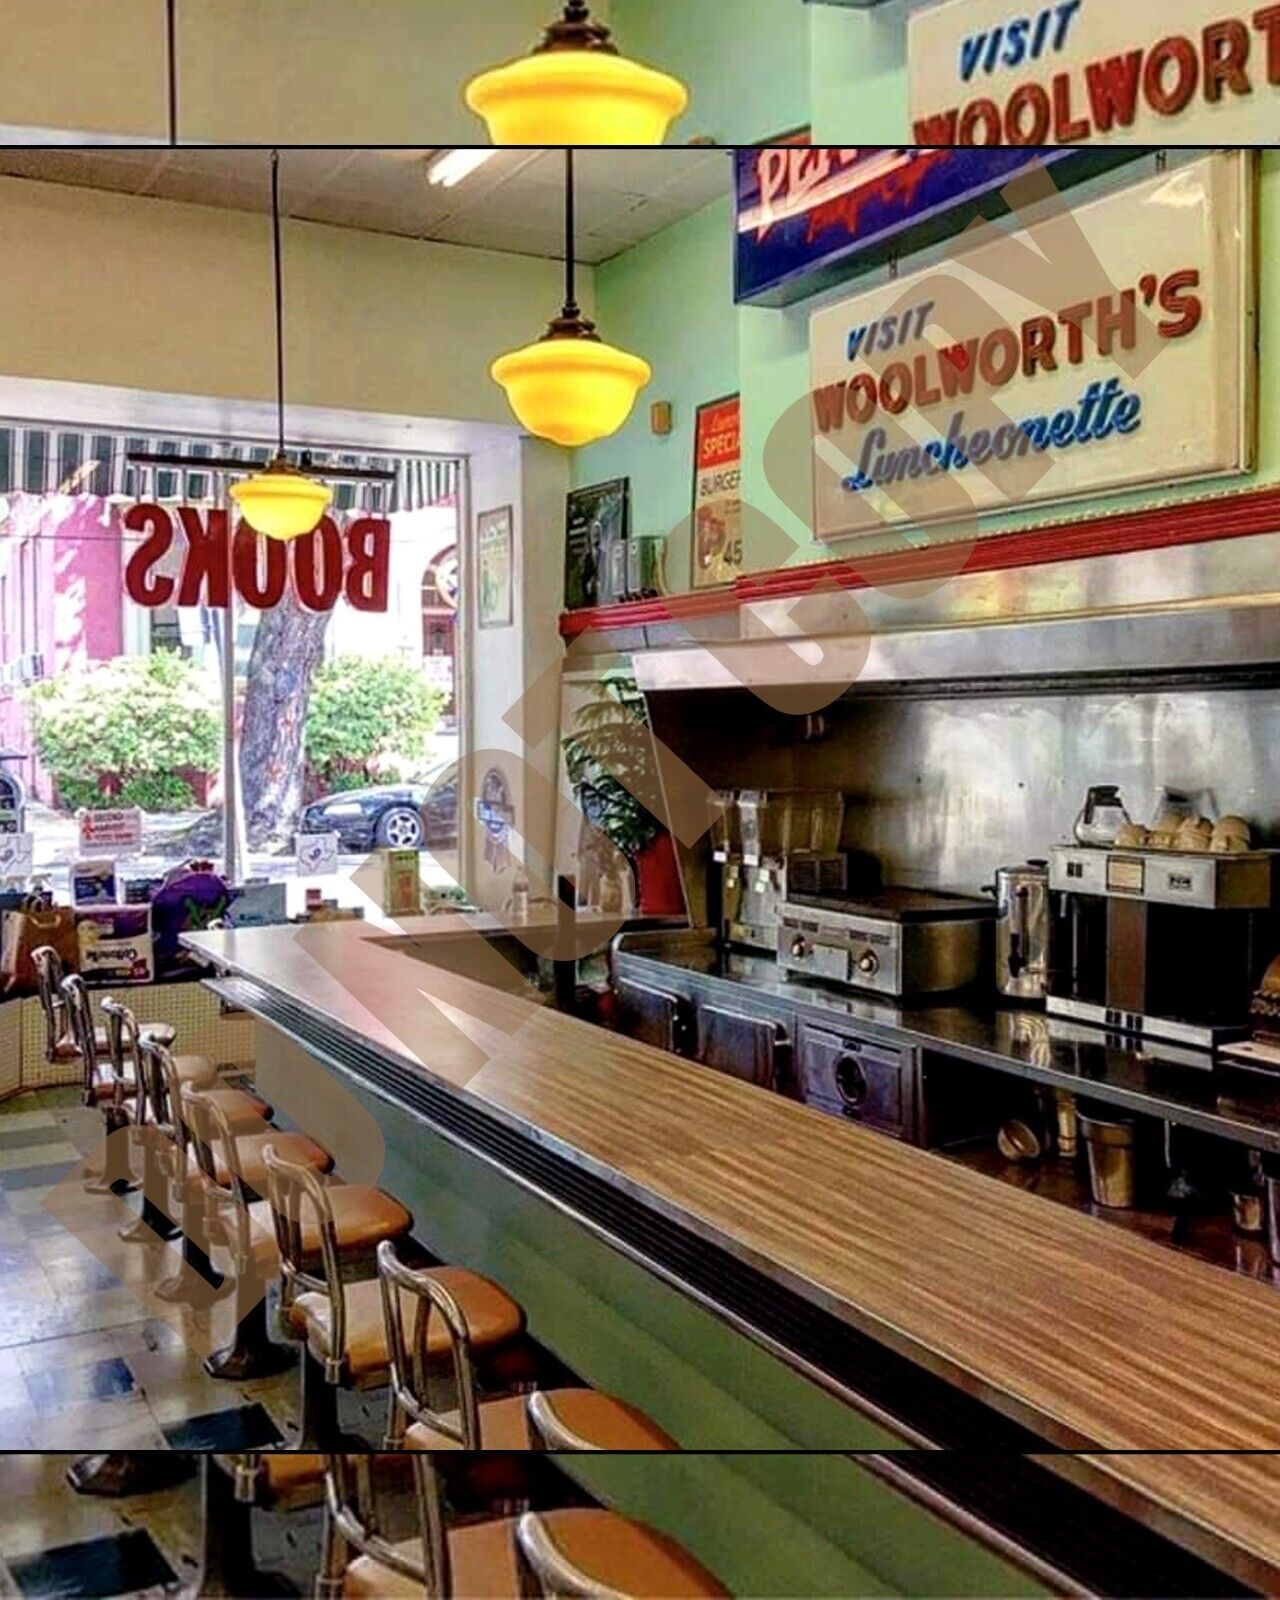 Vintage Woolworth's Luncheonette Diner Cafe Counter Collage 8x10 Photo